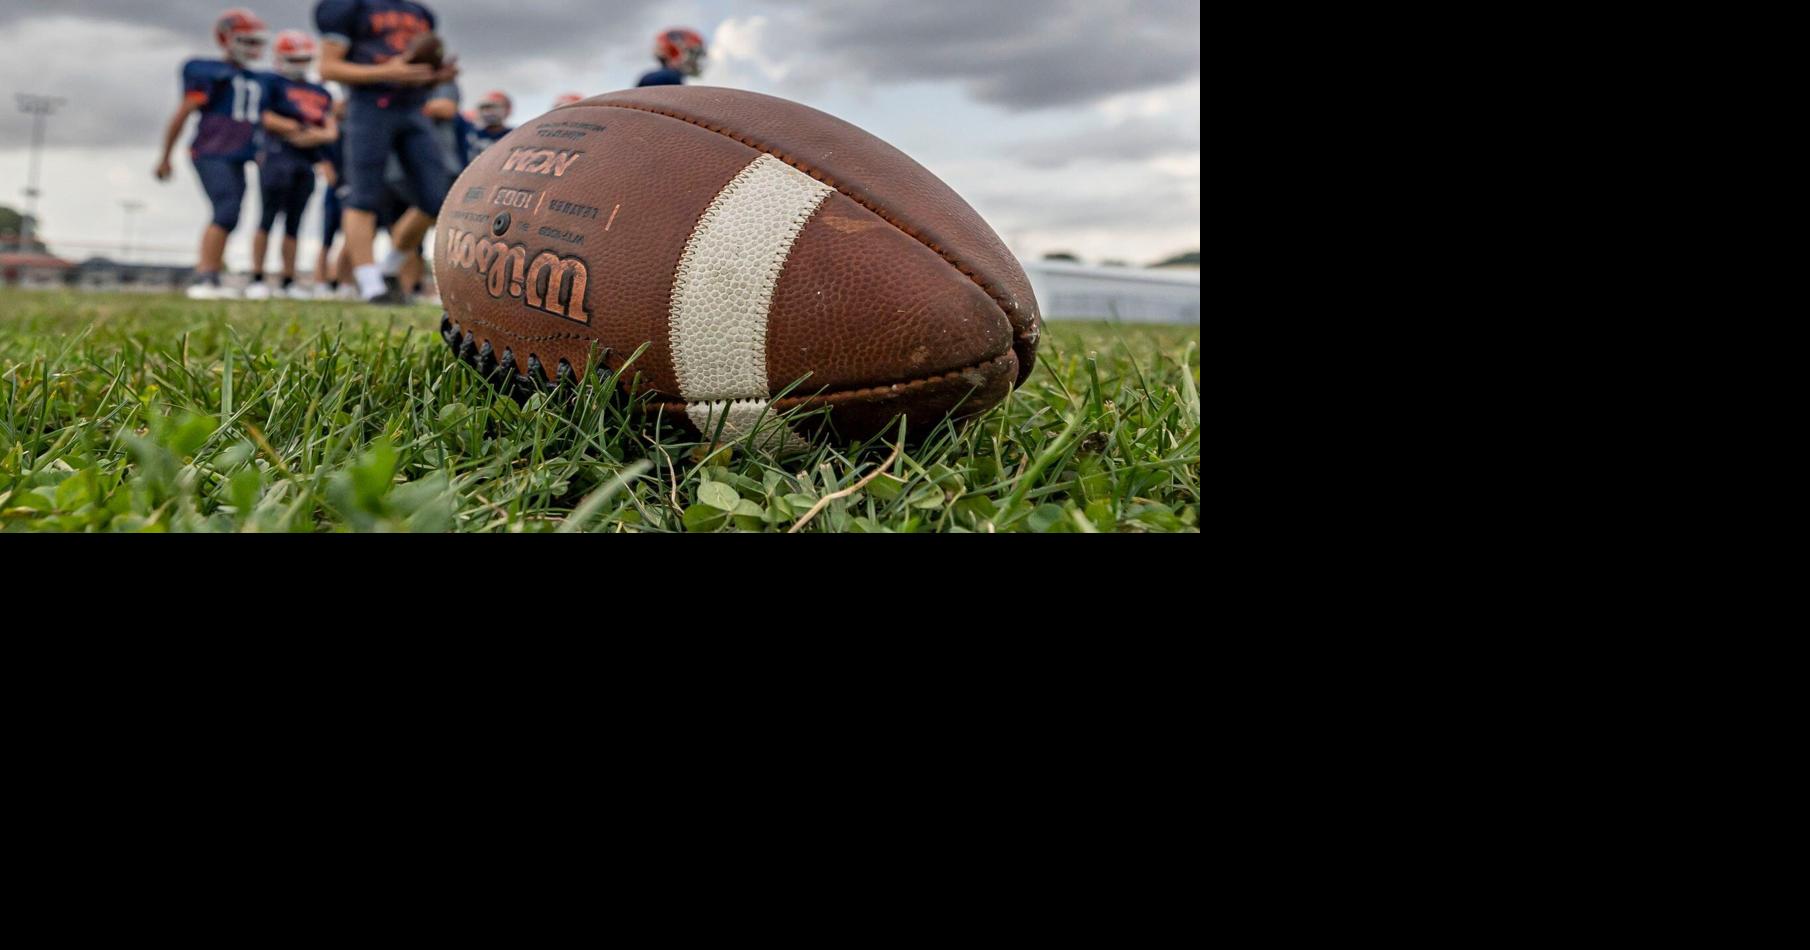 Live Week 4 score updates from throughout the Central Illinois area